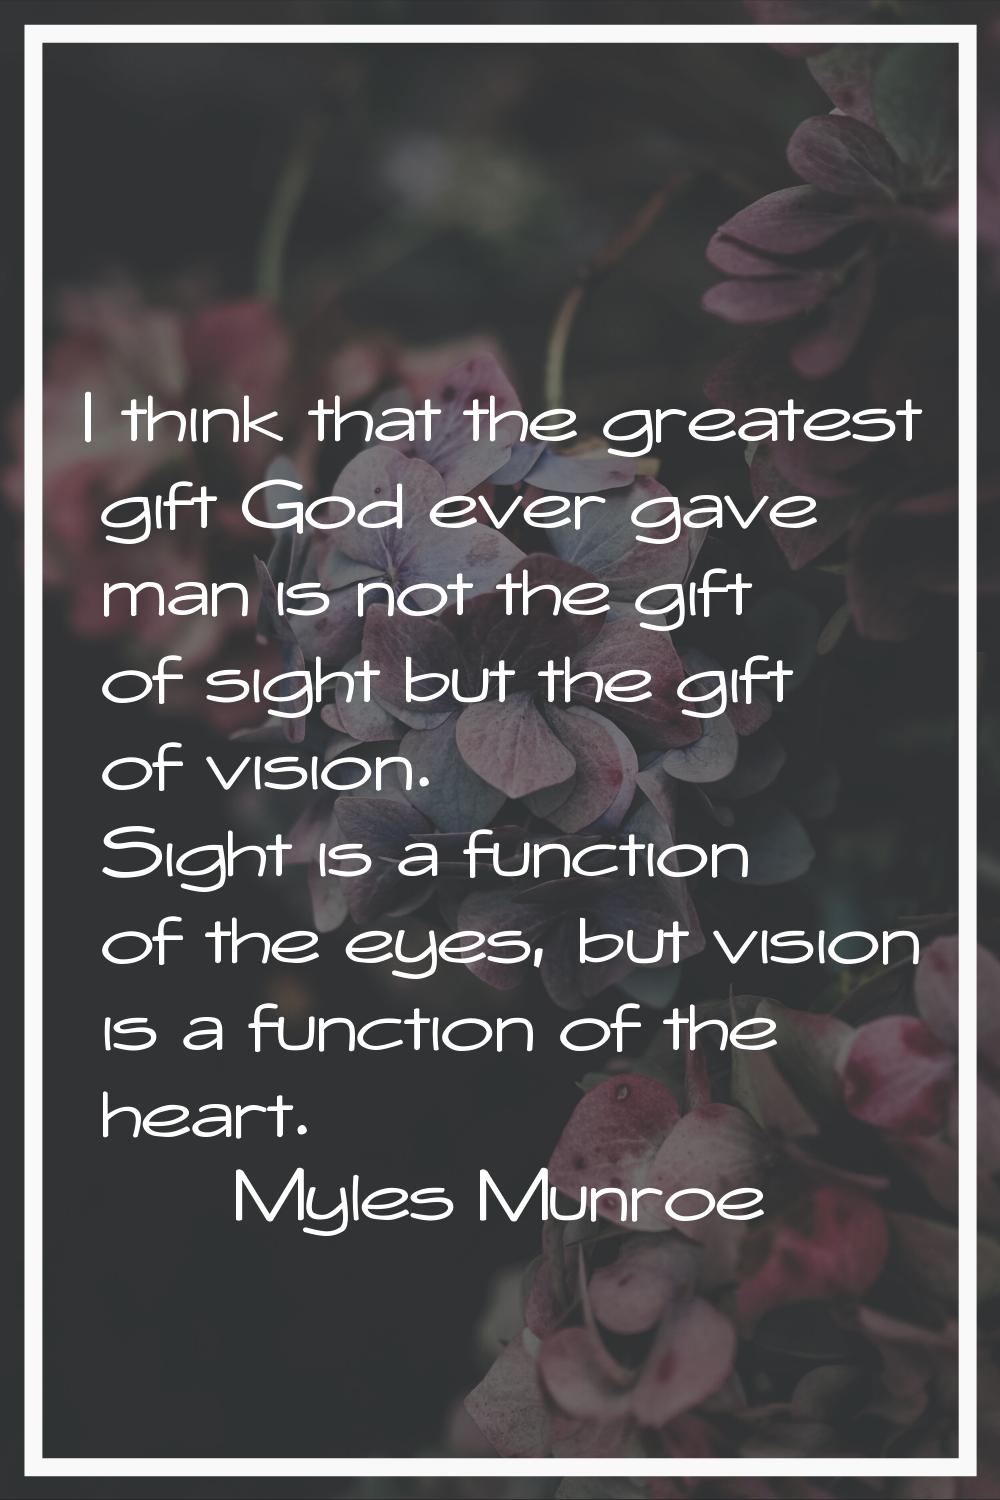 I think that the greatest gift God ever gave man is not the gift of sight but the gift of vision. S